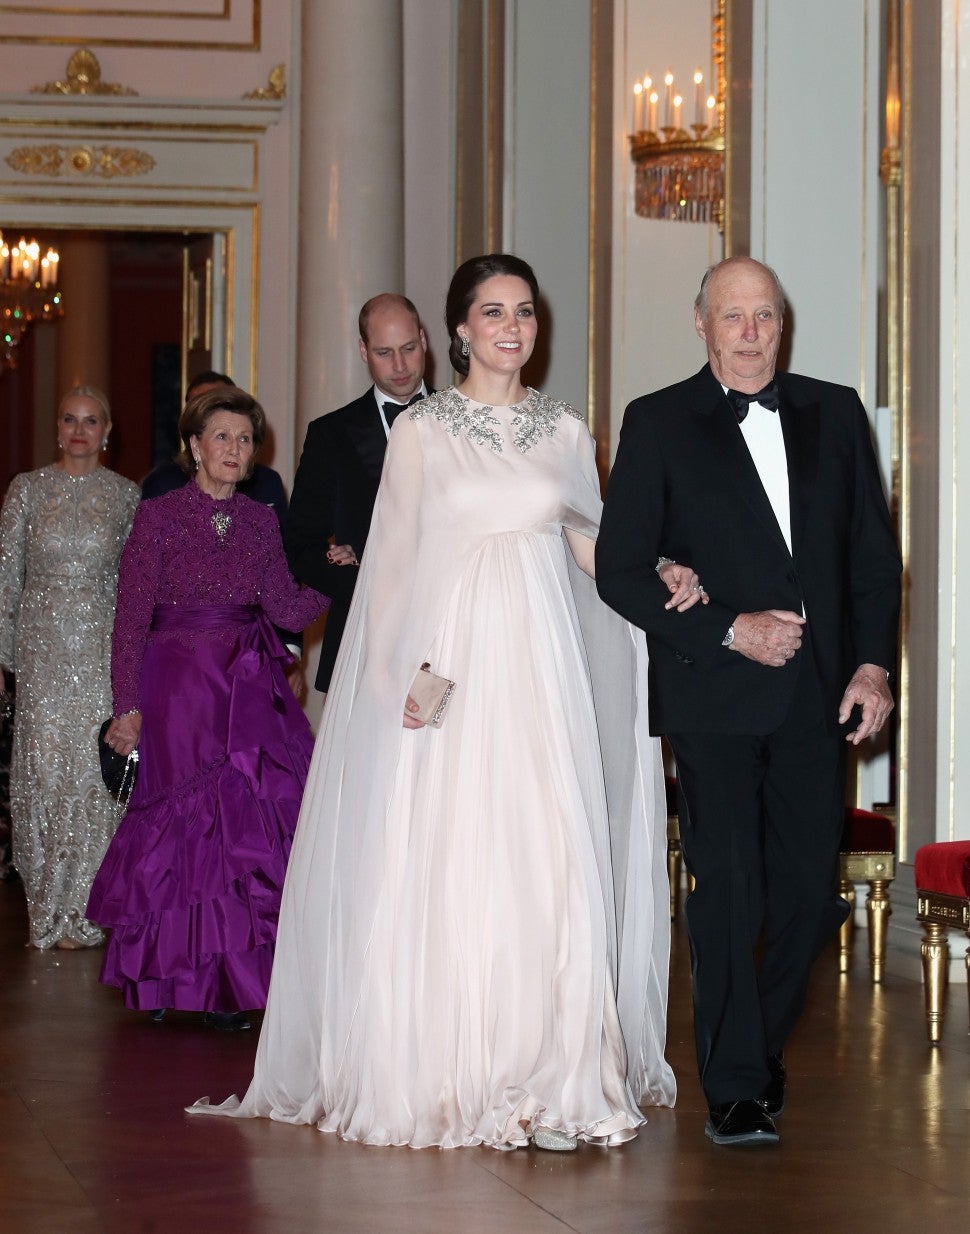 Kate Middleton attends an official dinner in honor of her and husband Prince William at the Royal Palace in Oslo, Norway.